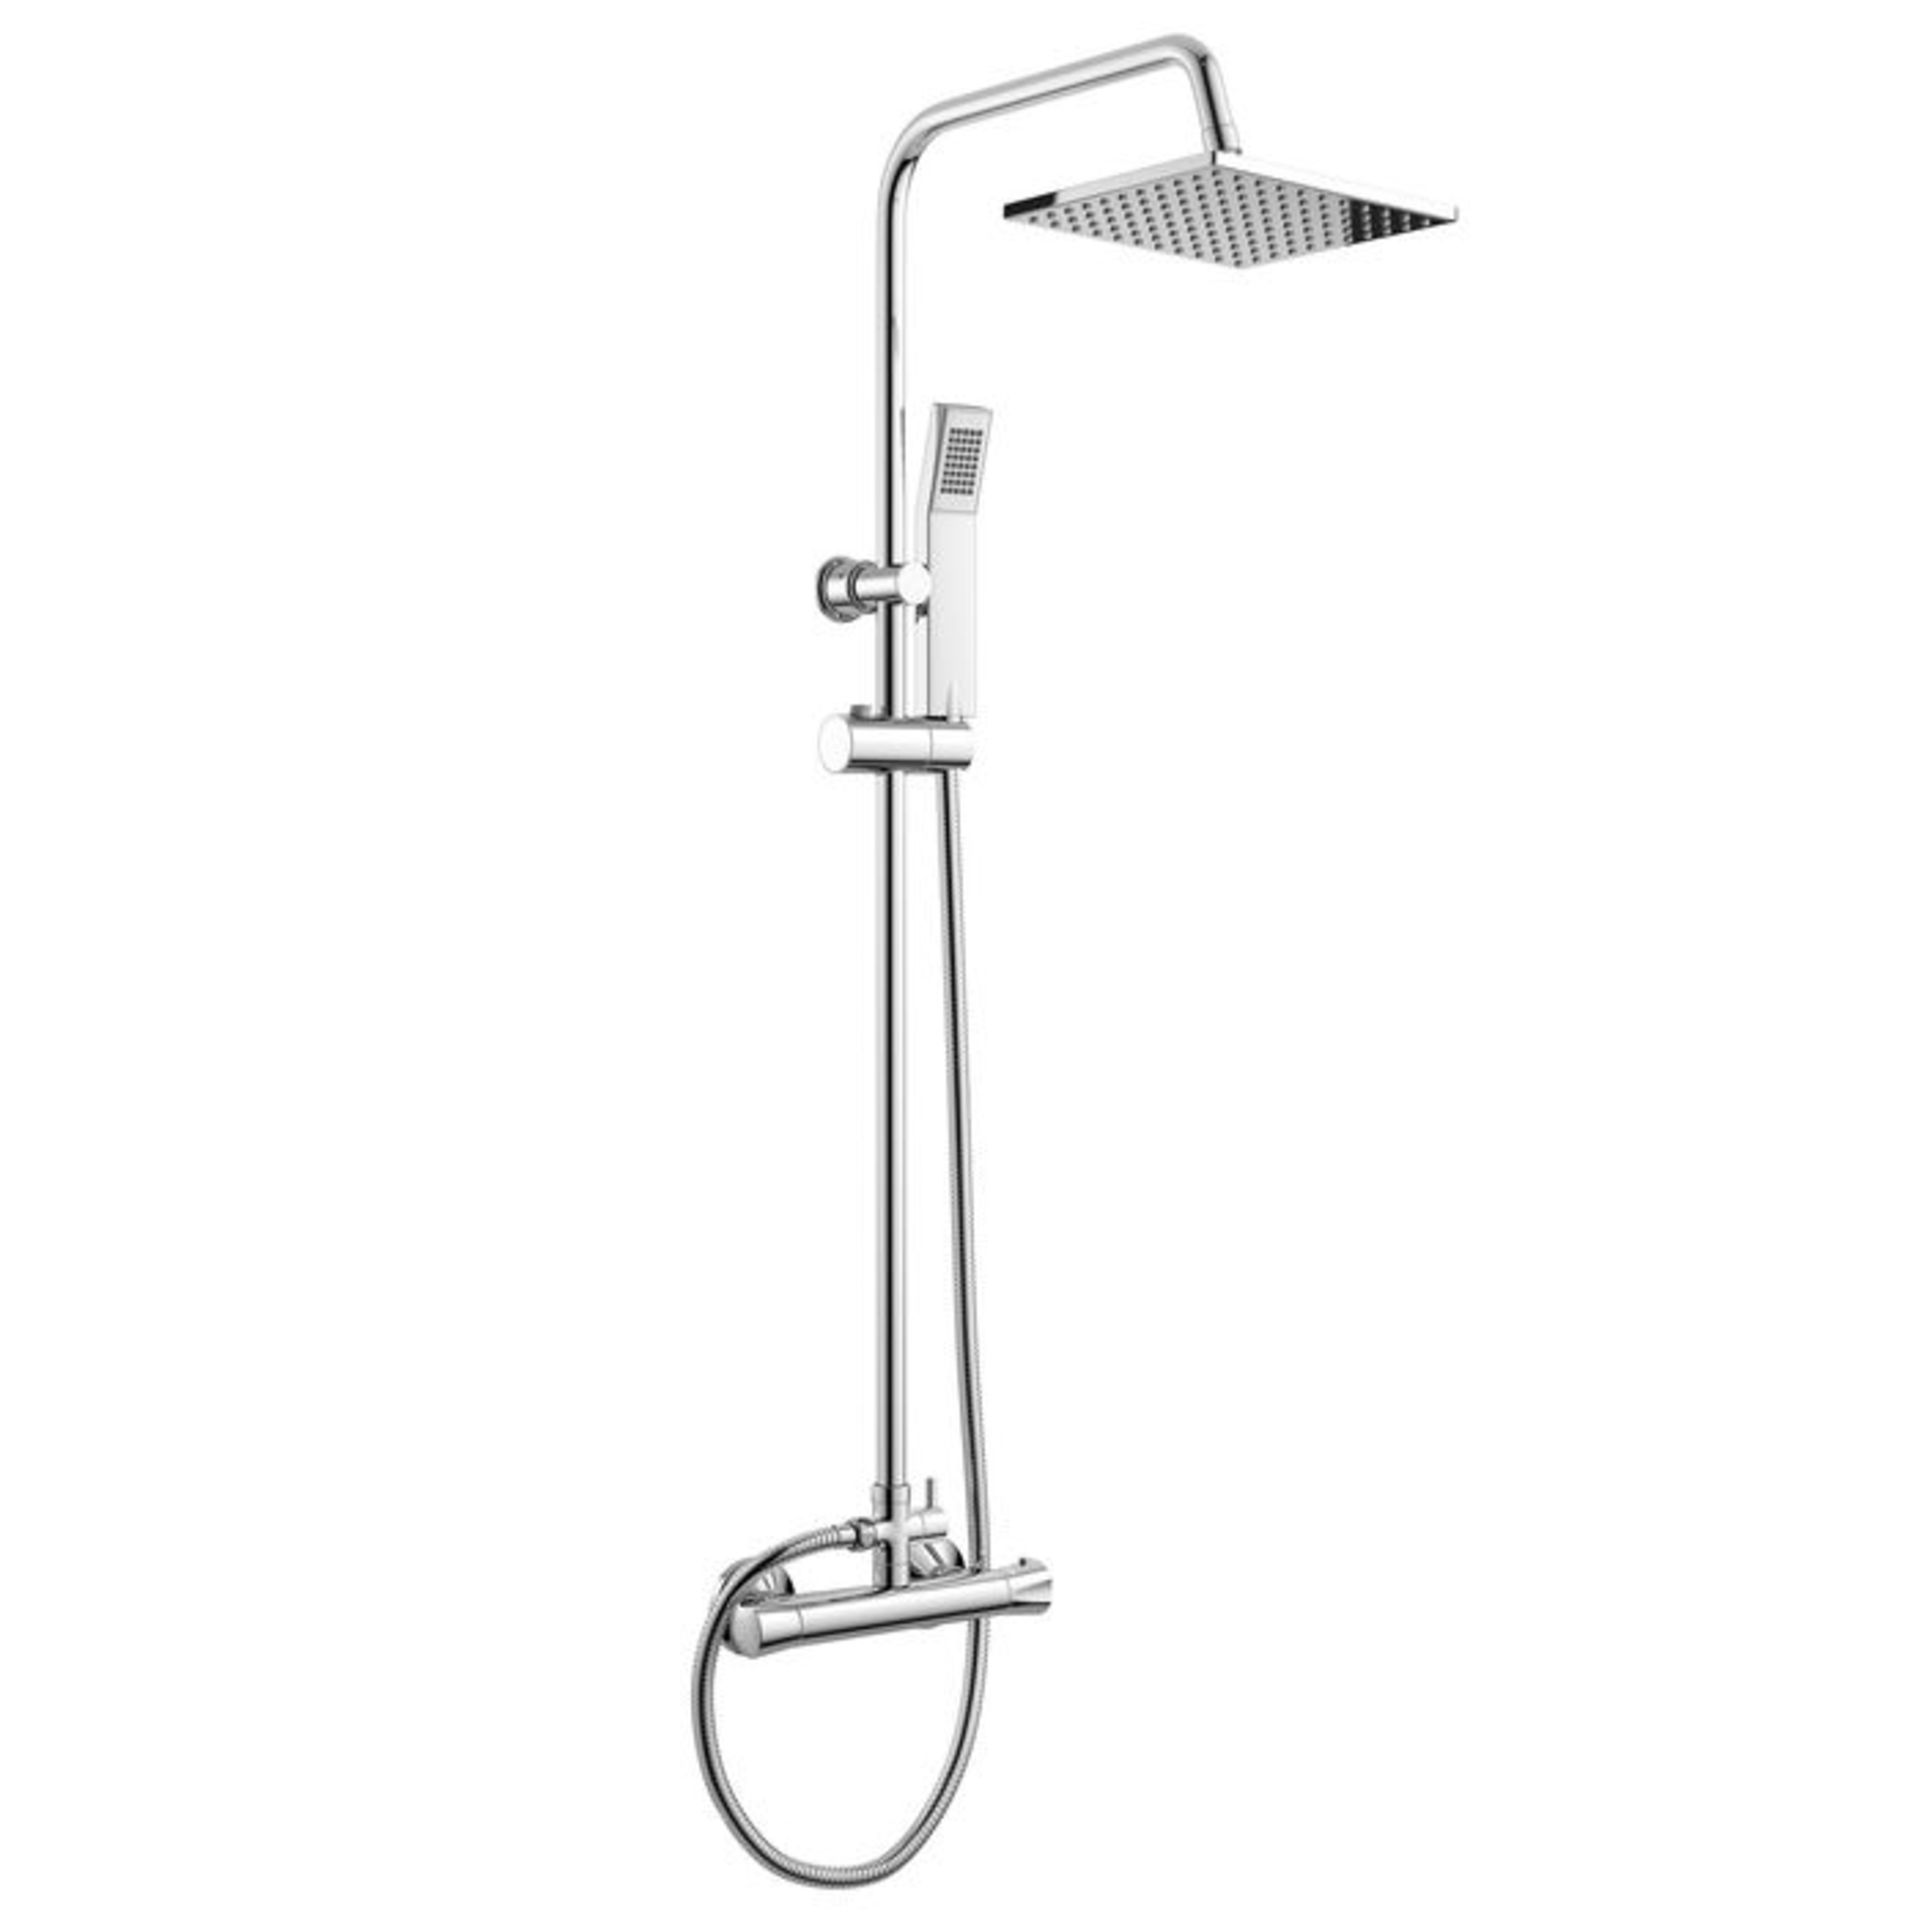 (ST76) Square Exposed Thermostatic Shower Kit Medium Head. Curved features and contemporary - Image 2 of 2